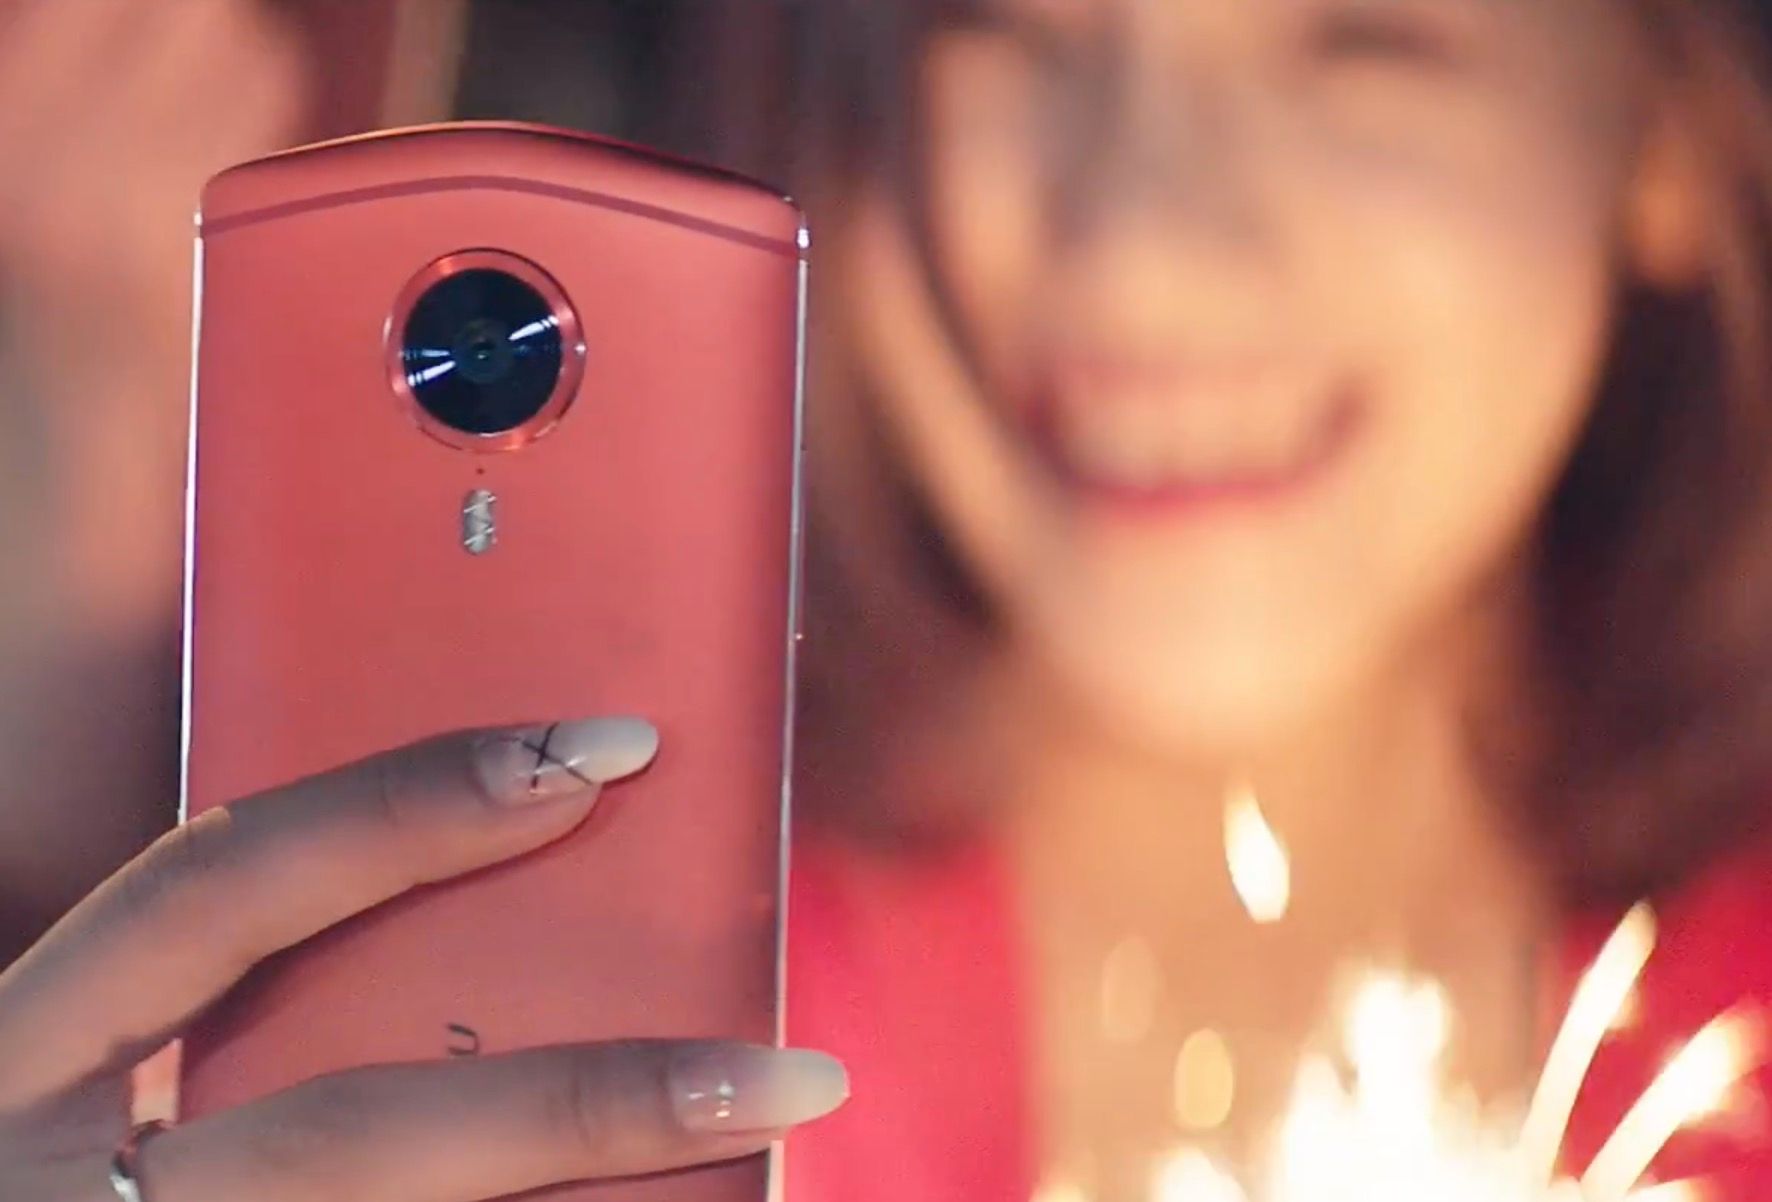 meitu s new t8 phone can beautify your selfies and videos in real time image 1